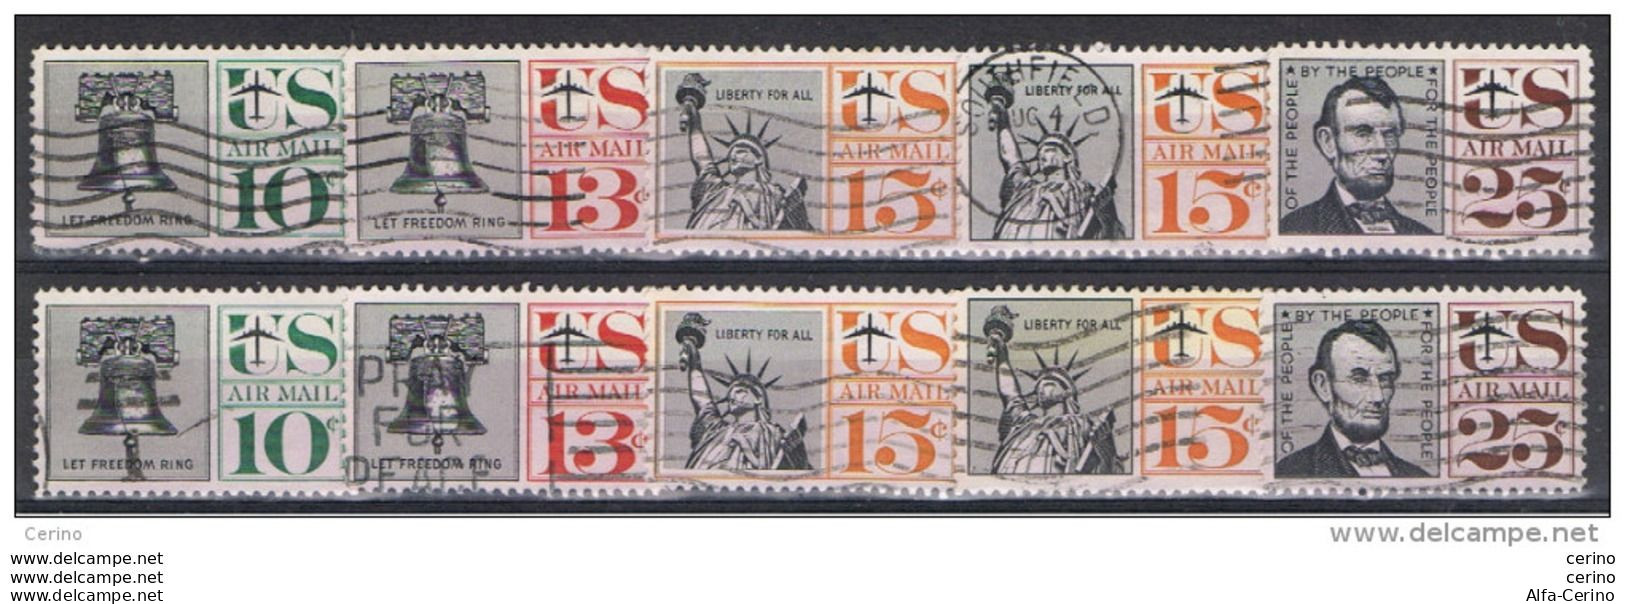 U.S.A.:  1959/61  AIR  MAIL  -  KOMPLET  SET  5  USED  STAMPS  -  REP.  2  EXEMPLARY  -  YV/TELL. 56/60 - 2a. 1941-1960 Usati